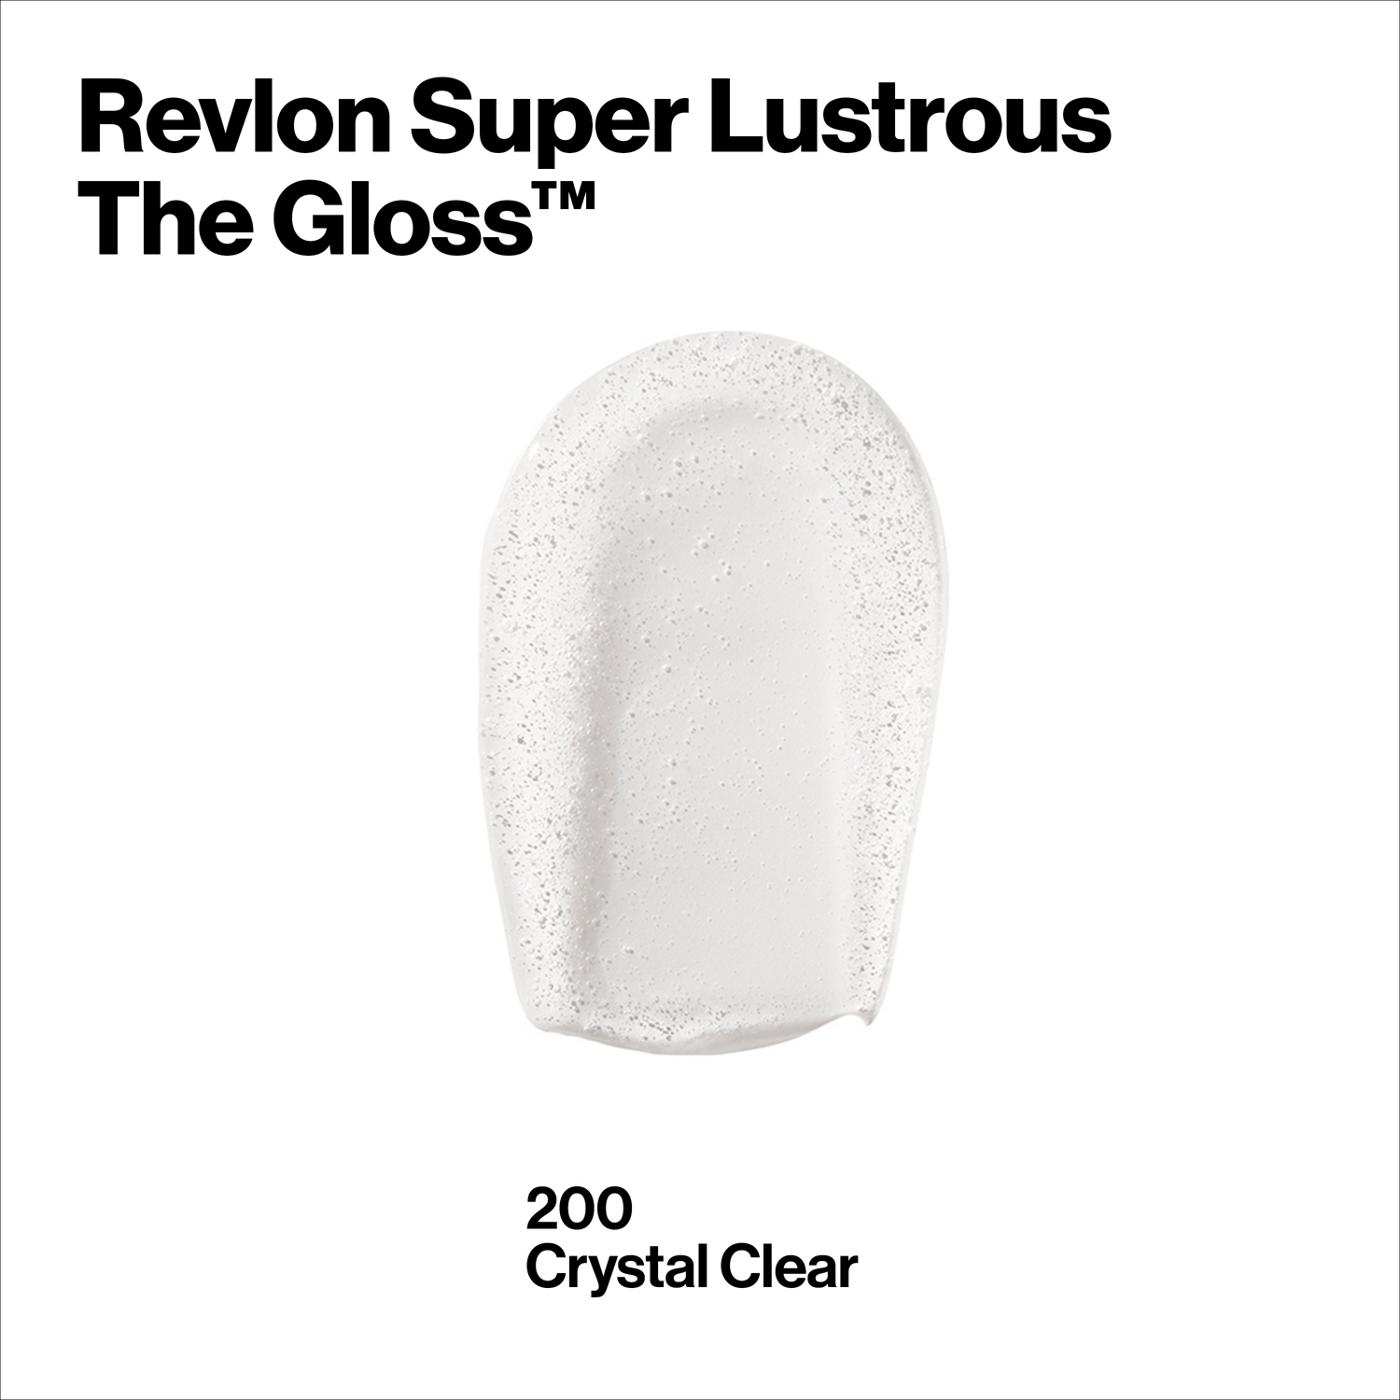 Revlon Super Lustrous The Gloss, 200 Crystal Clear; image 7 of 7